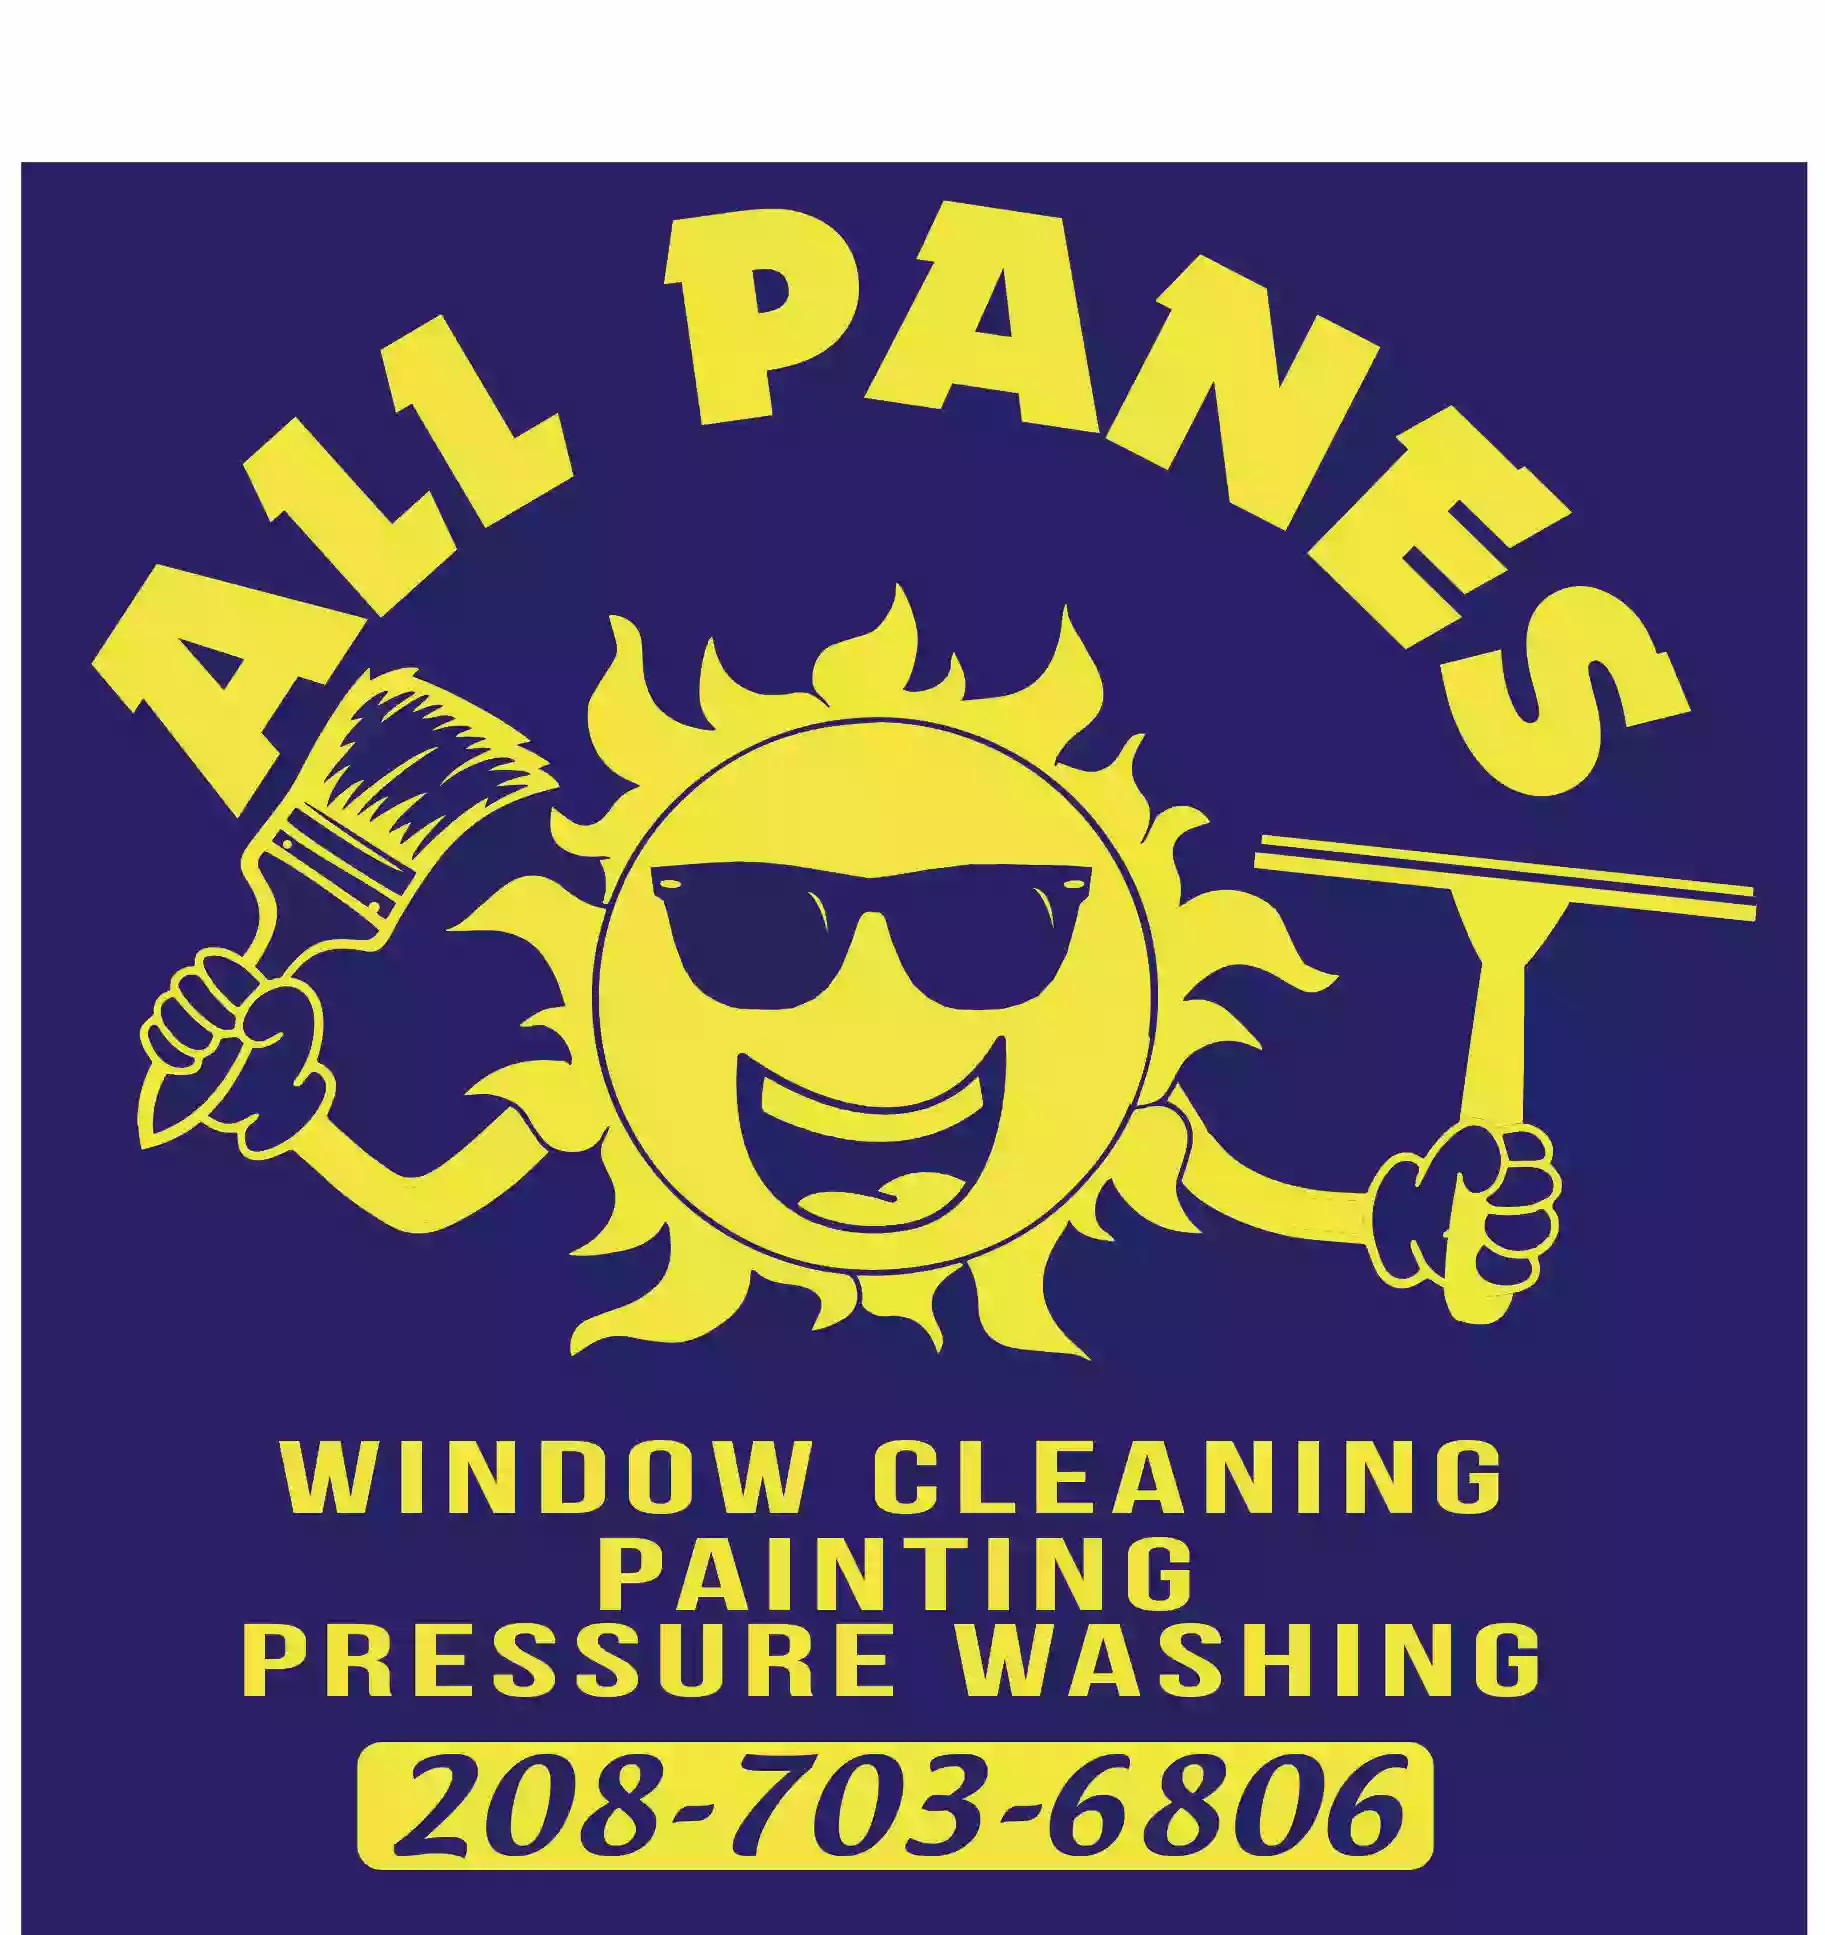 All Panes Window Cleaning, Painting, & Pressure Washing LLC.